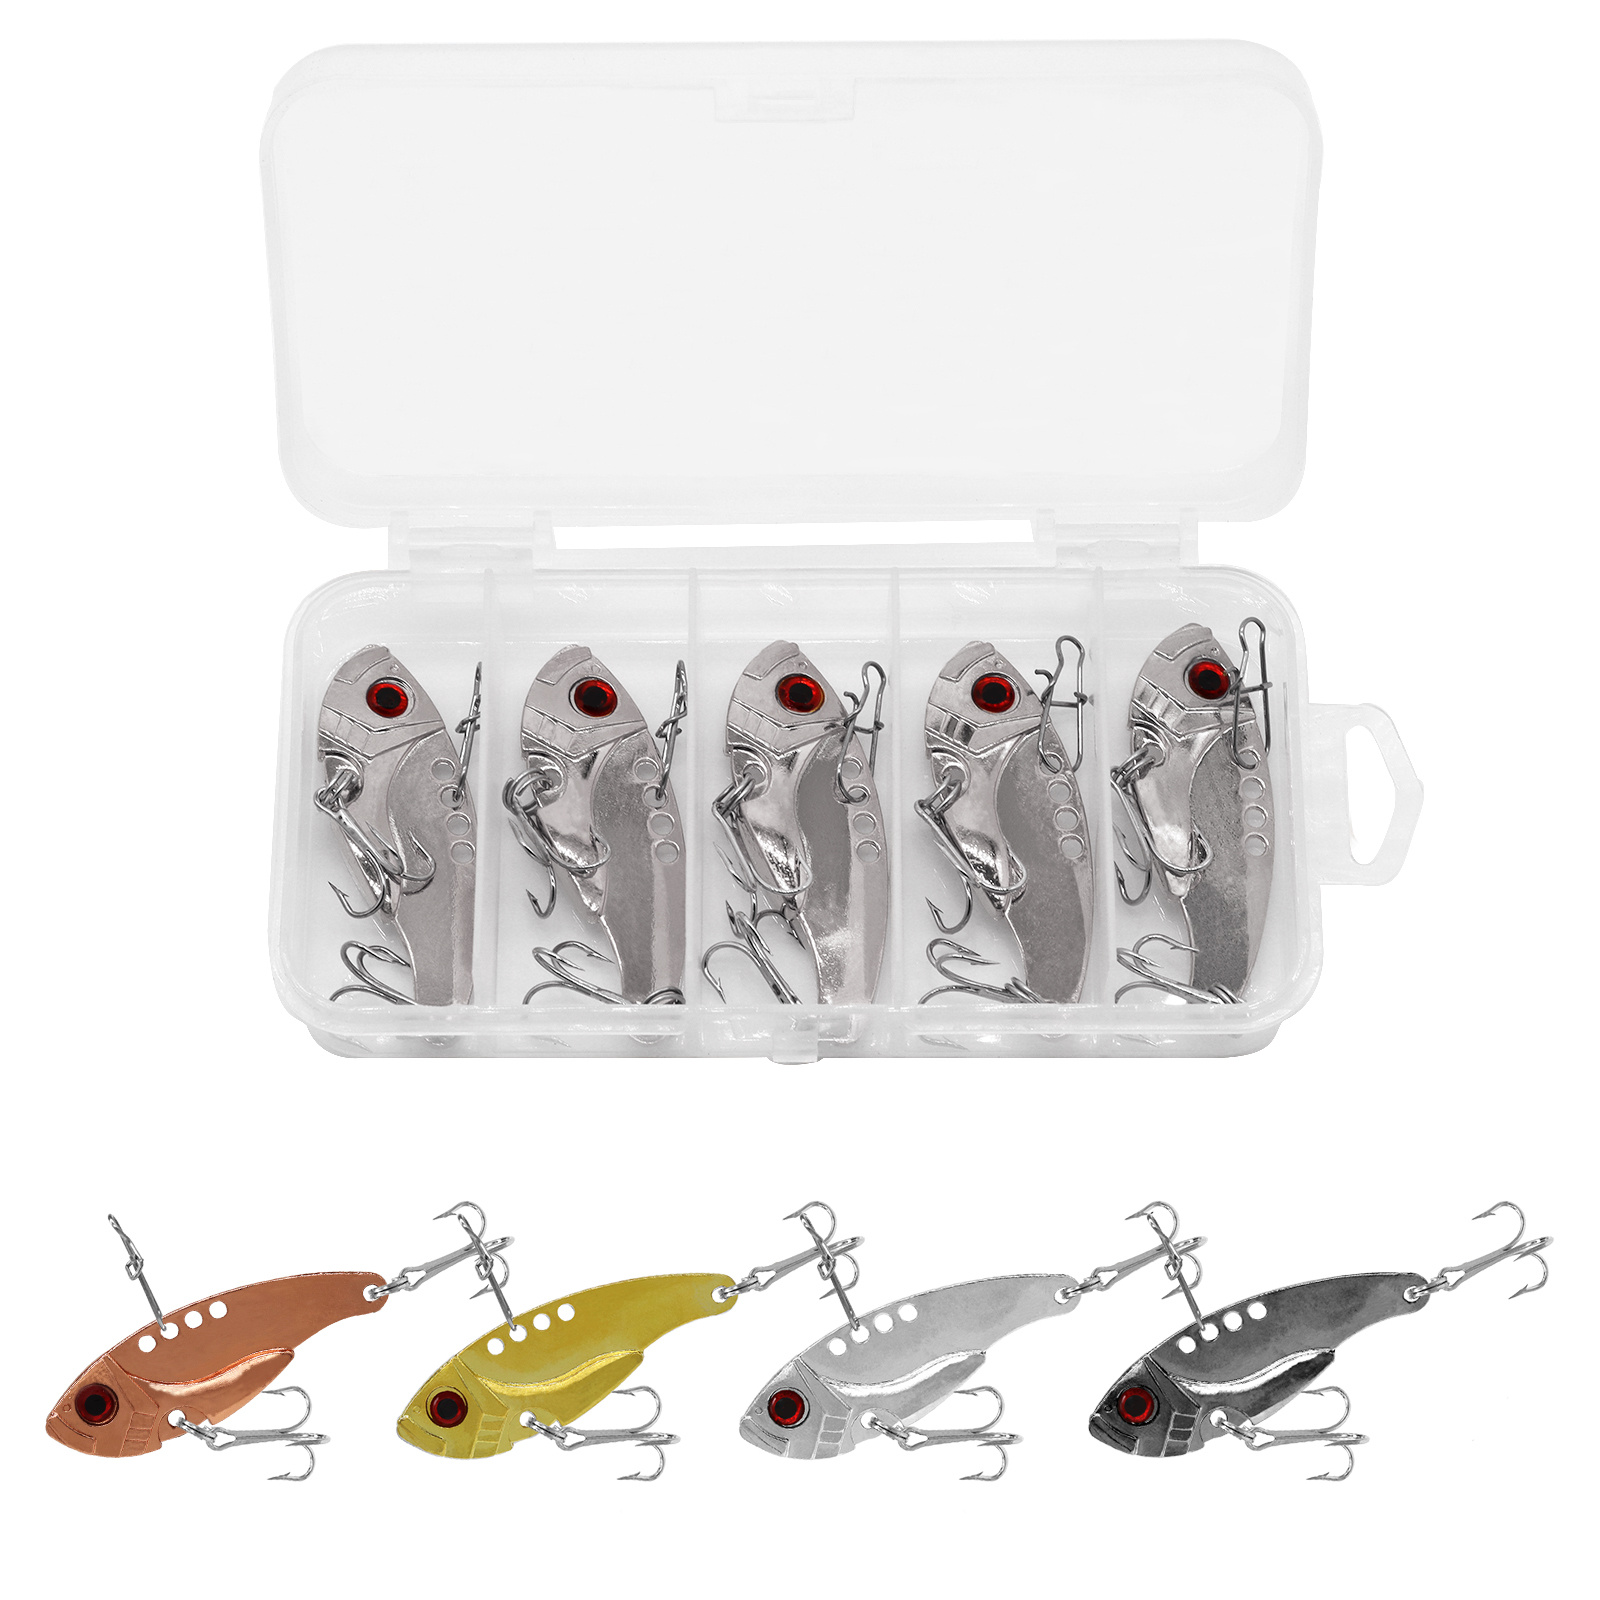 5pcs Small Gray Fish Artificial Lures With Hooks For Freshwater